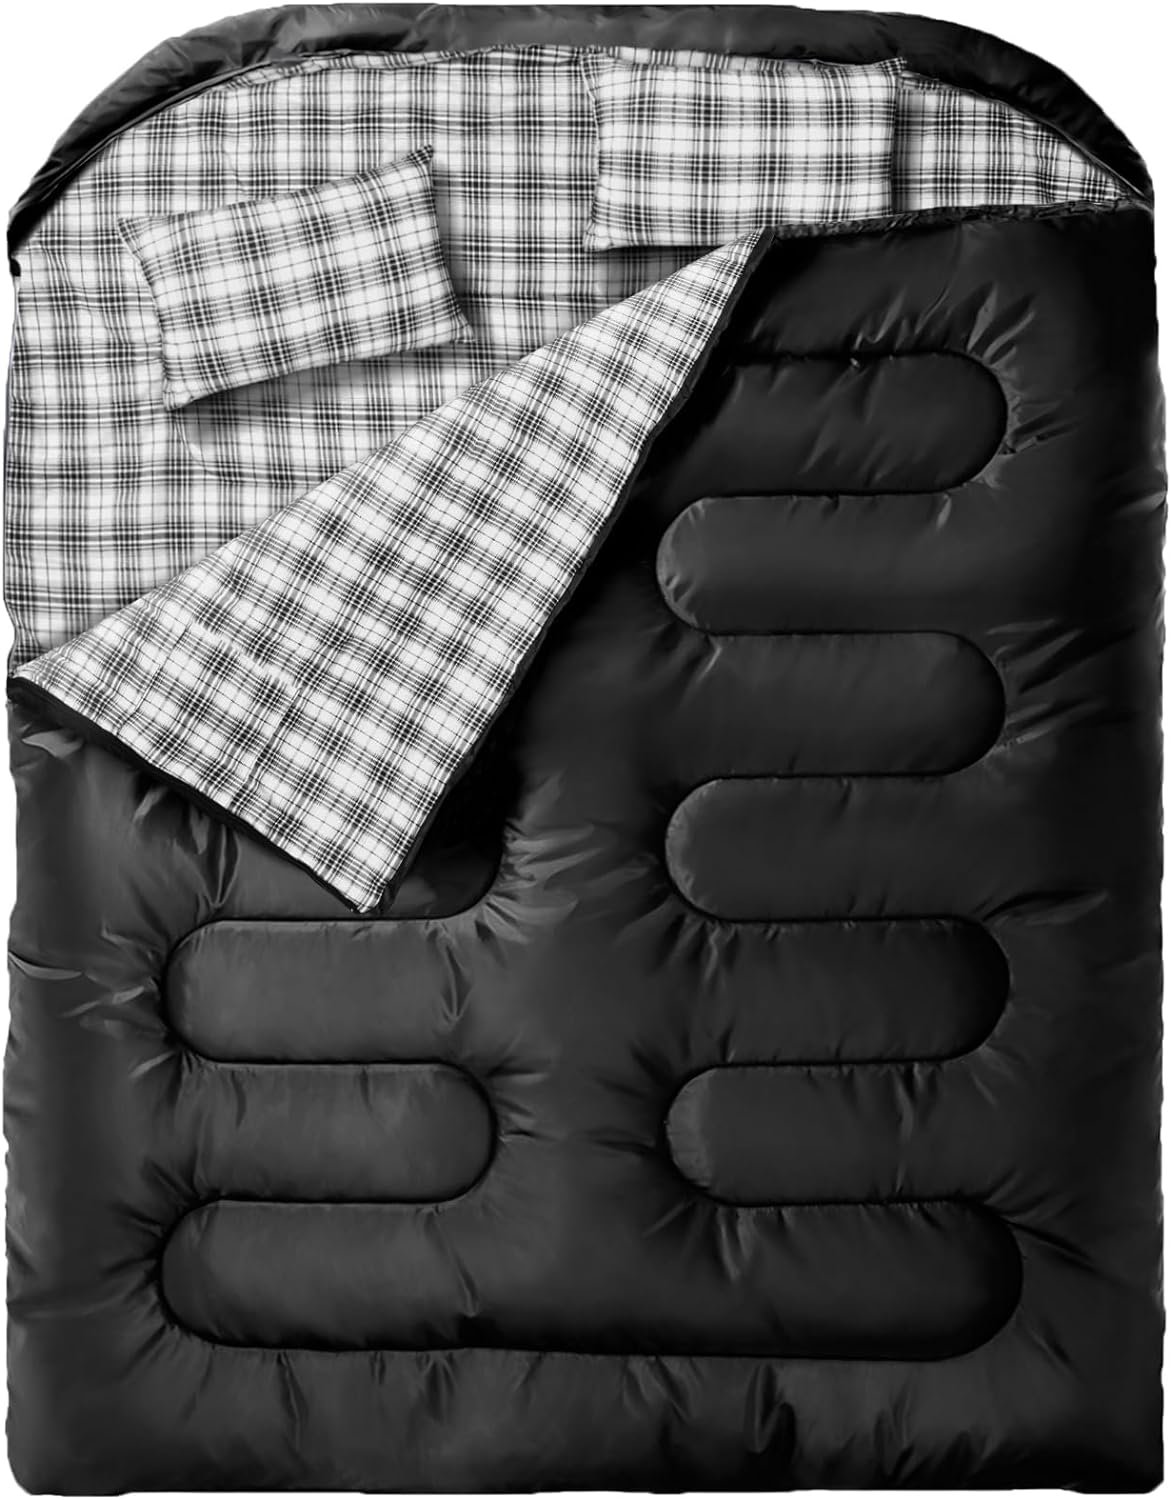 MEREZA Flannel Double Sleeping Bags for Adults, 2 Person Sleeping Bags for Mens Camping XL Queen Size Two Person Sleeping Bag for Cold Weather & Warm Waterproof with Compression Sack